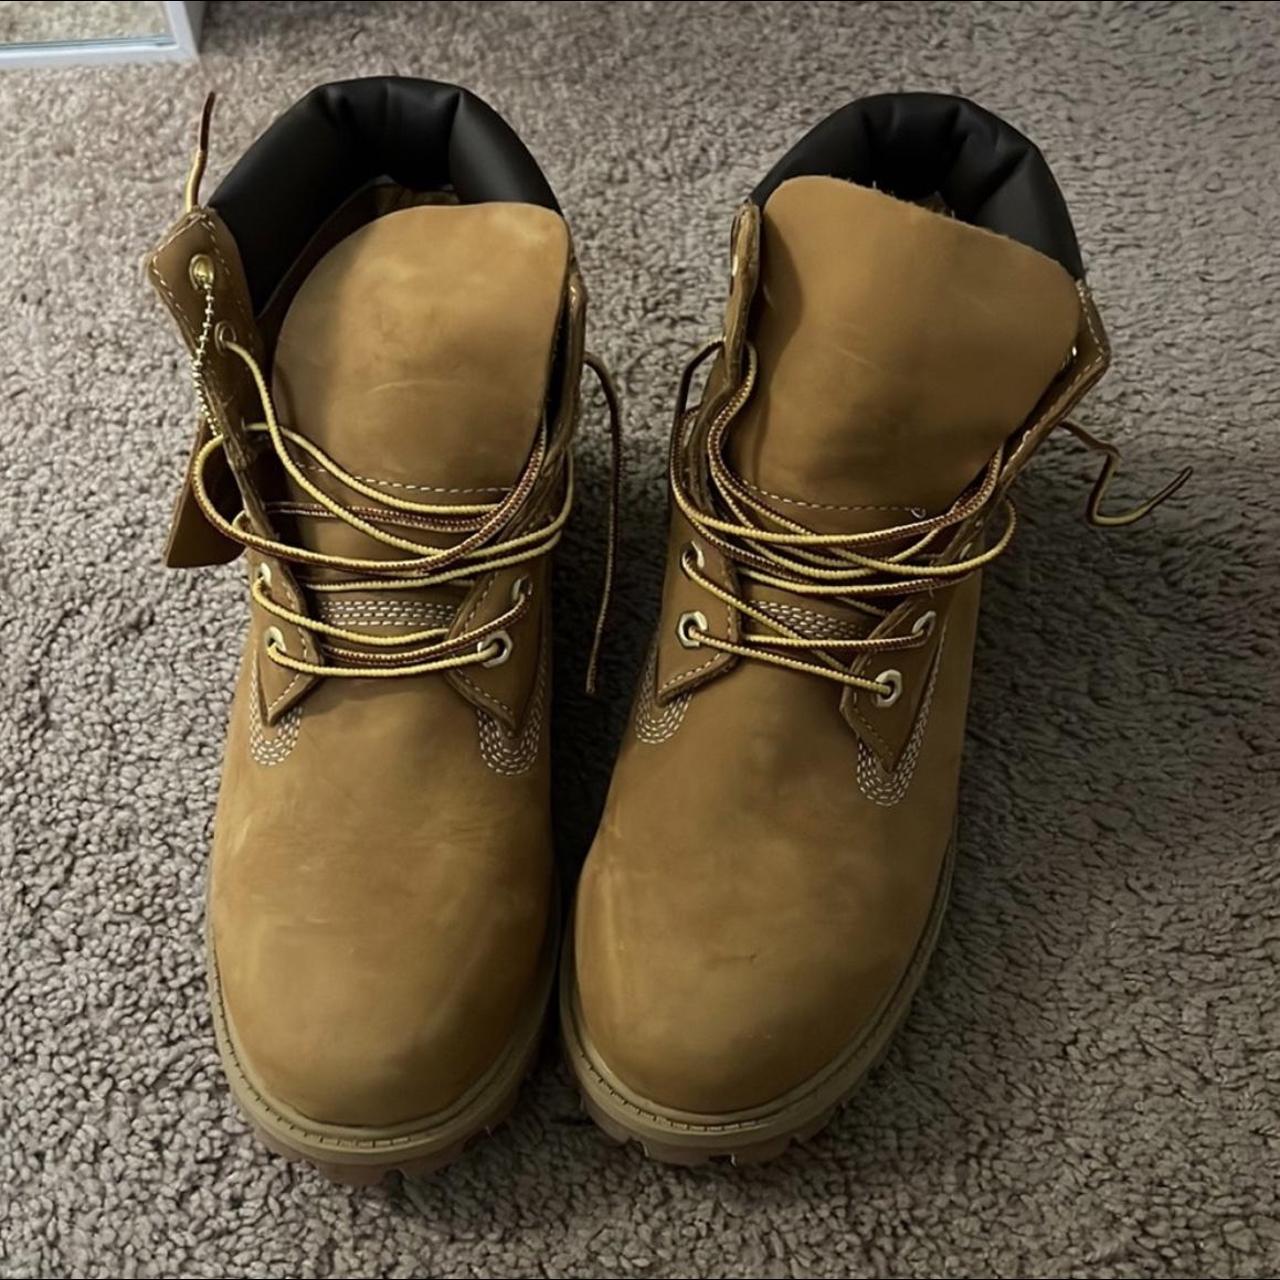 Timberland Women's Tan and Brown Boots | Depop